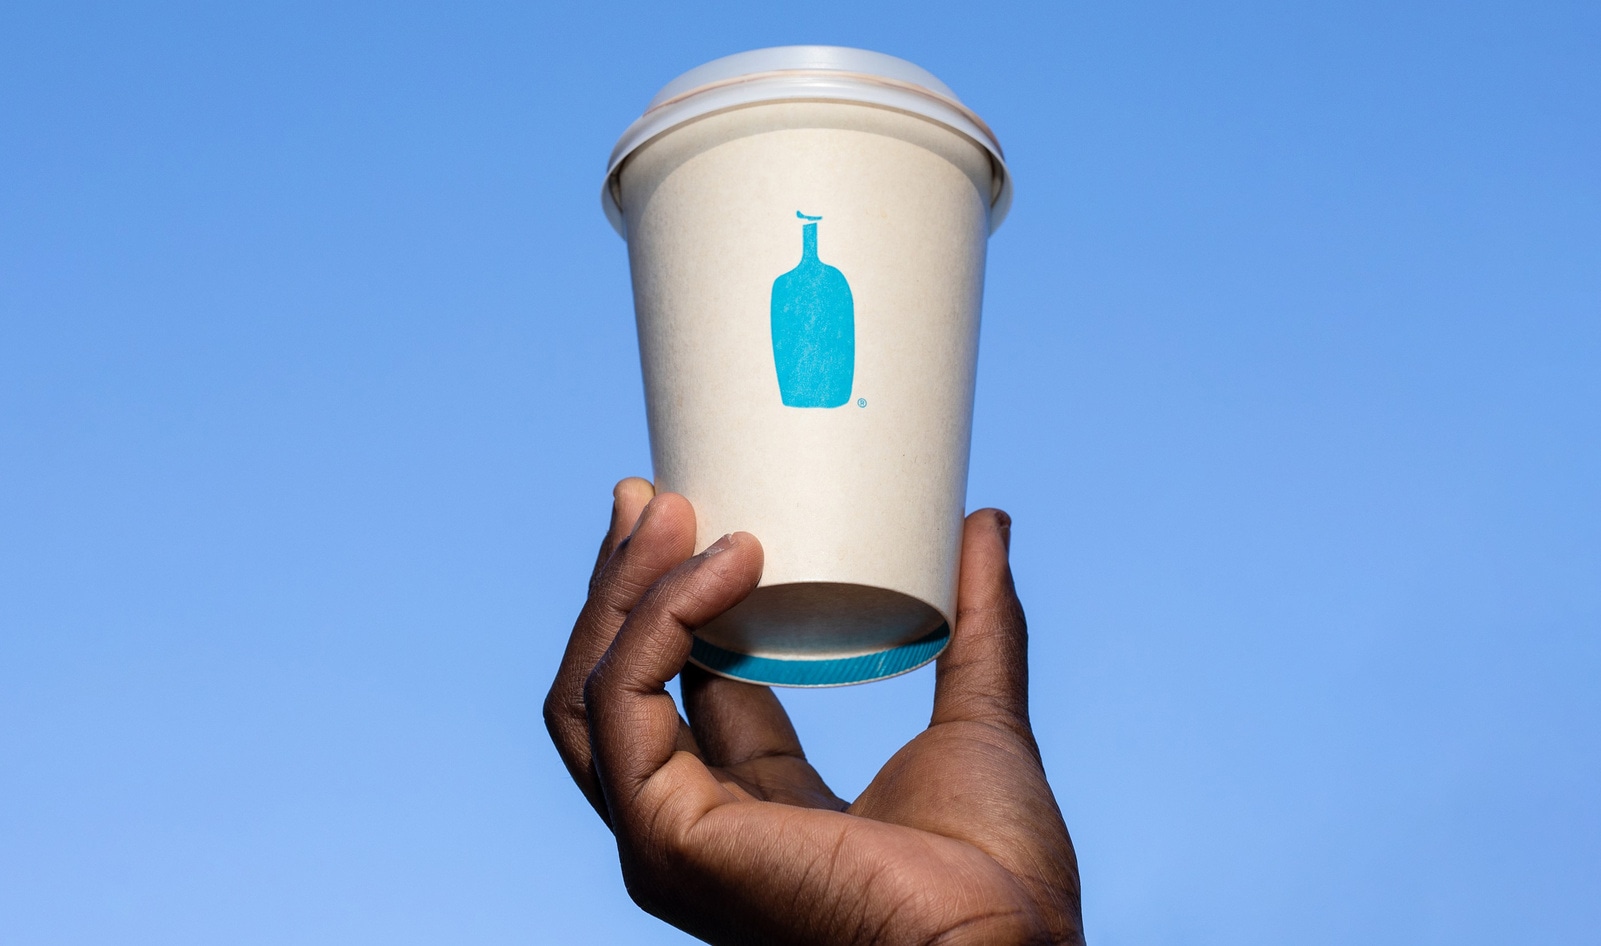 Move Over Dairy: Blue Bottle Defaults to Oat Milk at California Shops